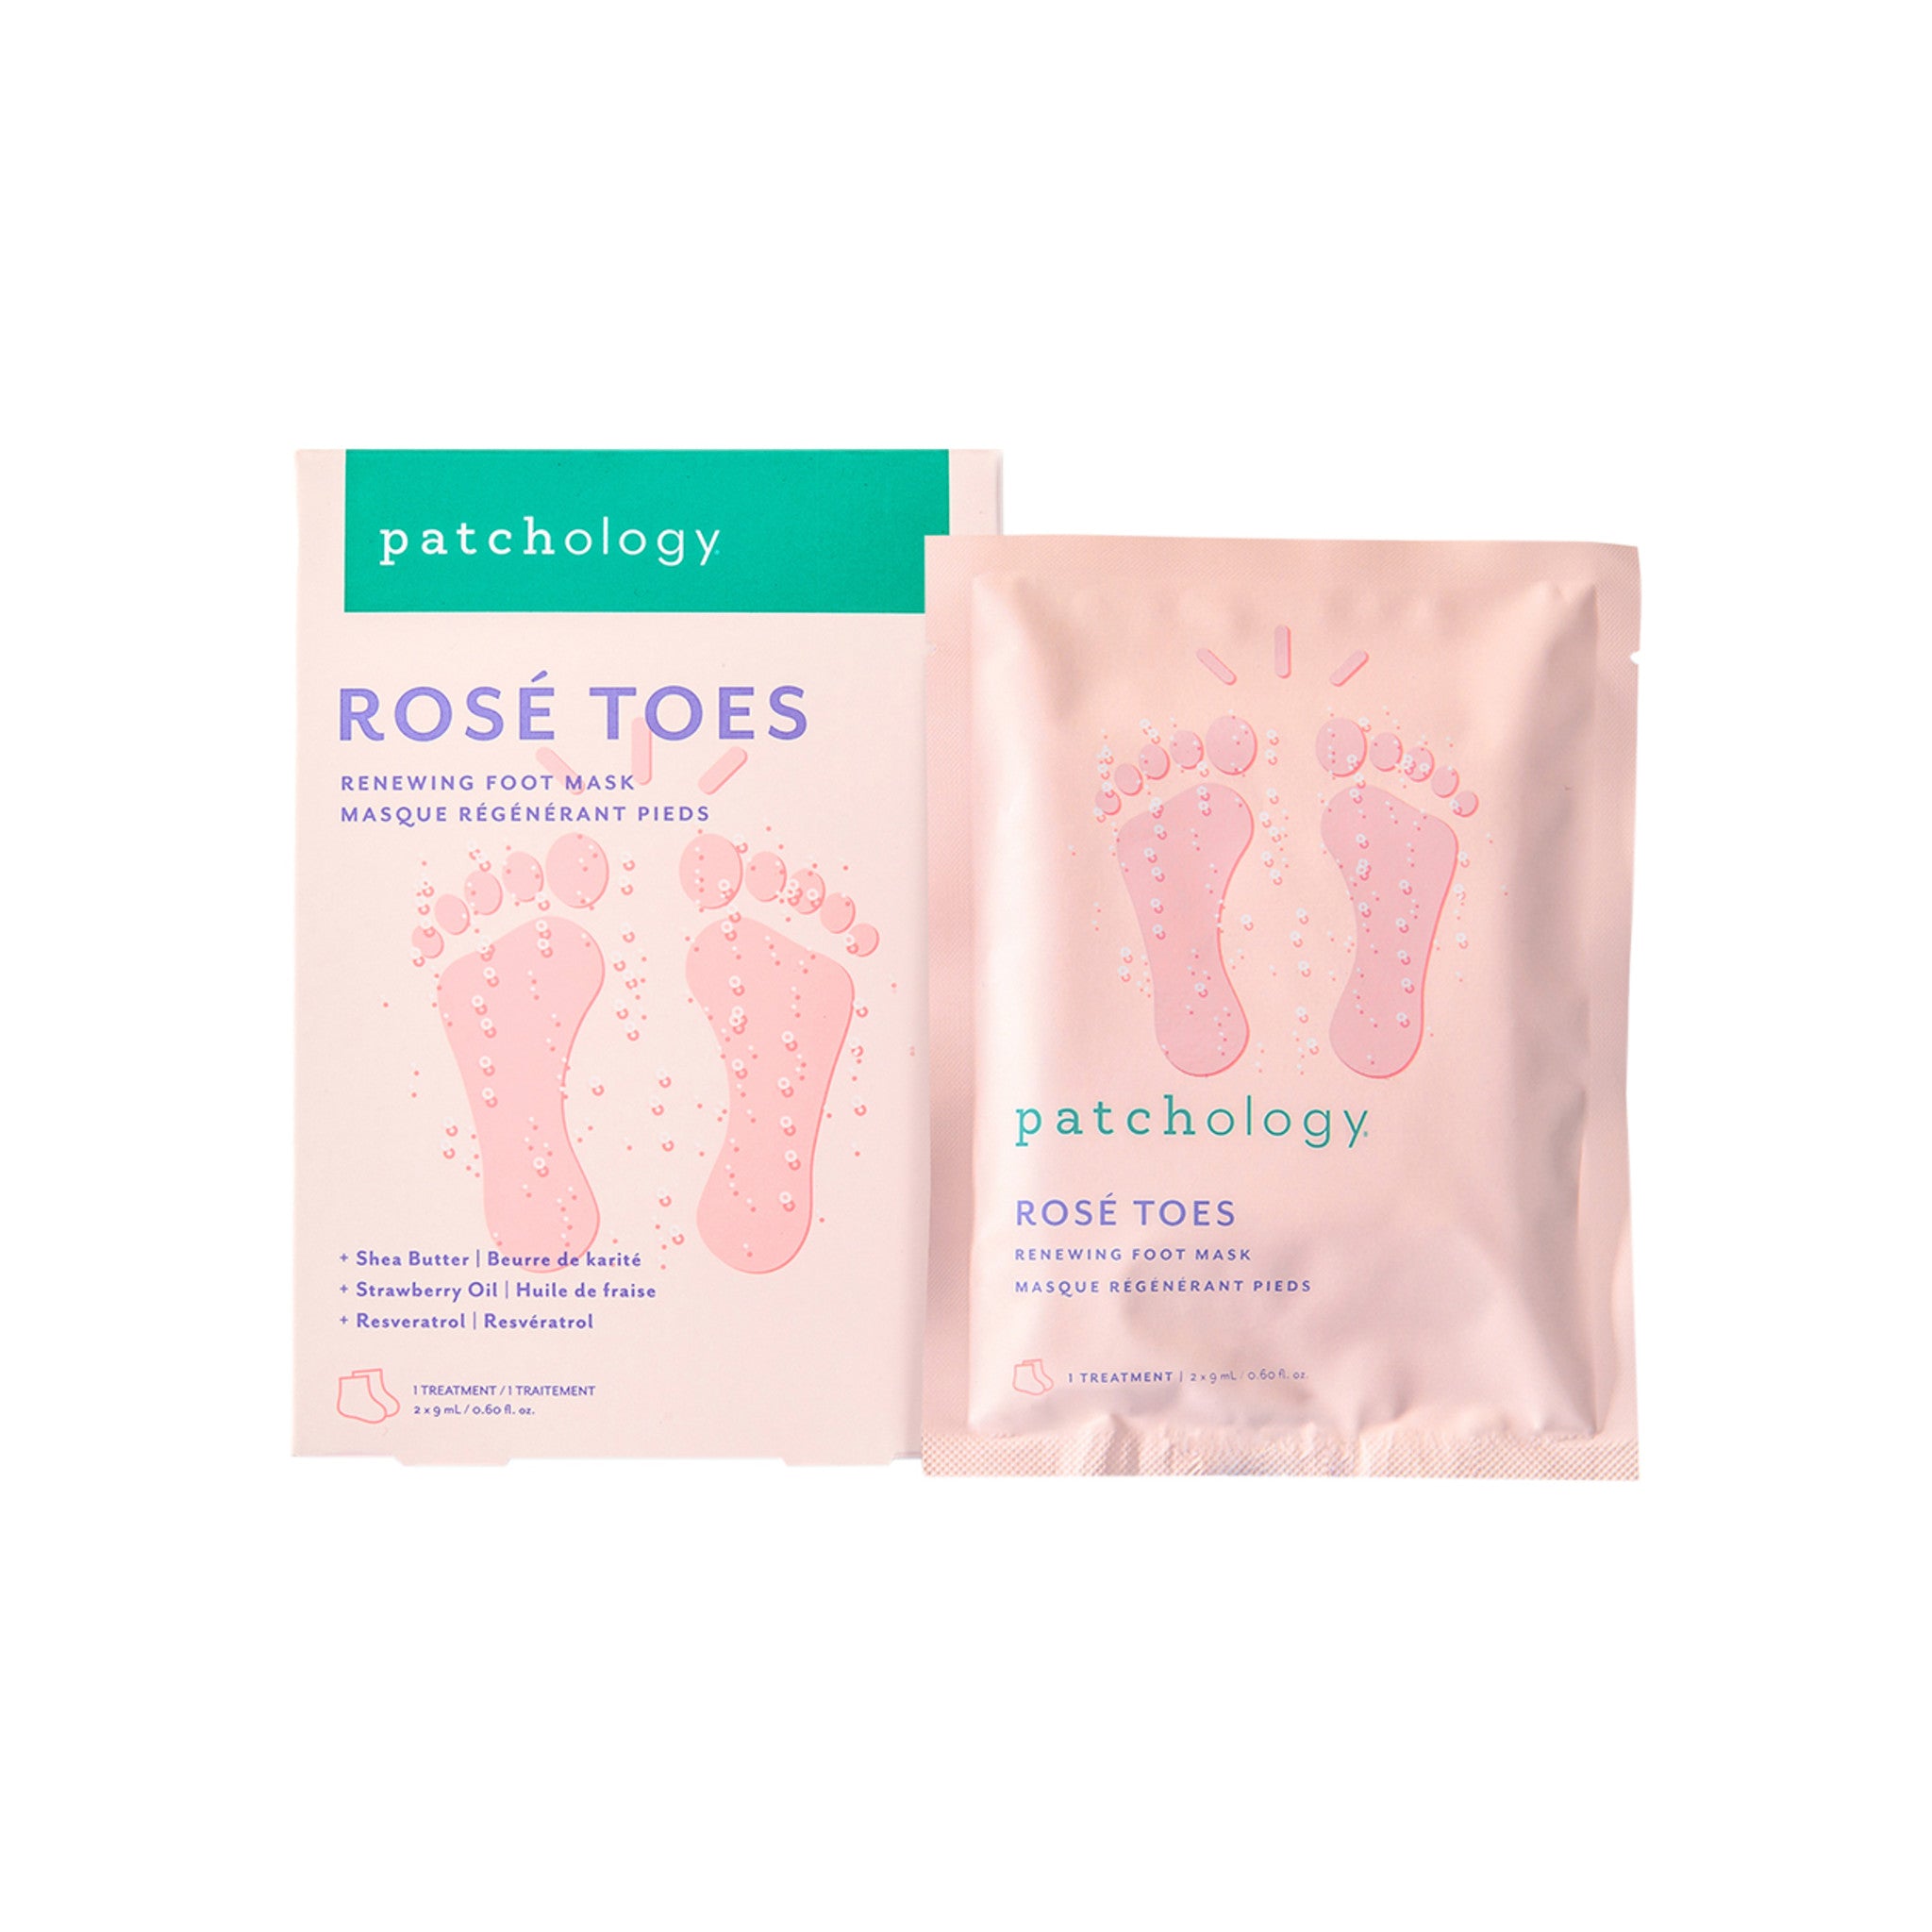 Patchology Rosé Toes Renewing and Protecting Foot Mask main image.